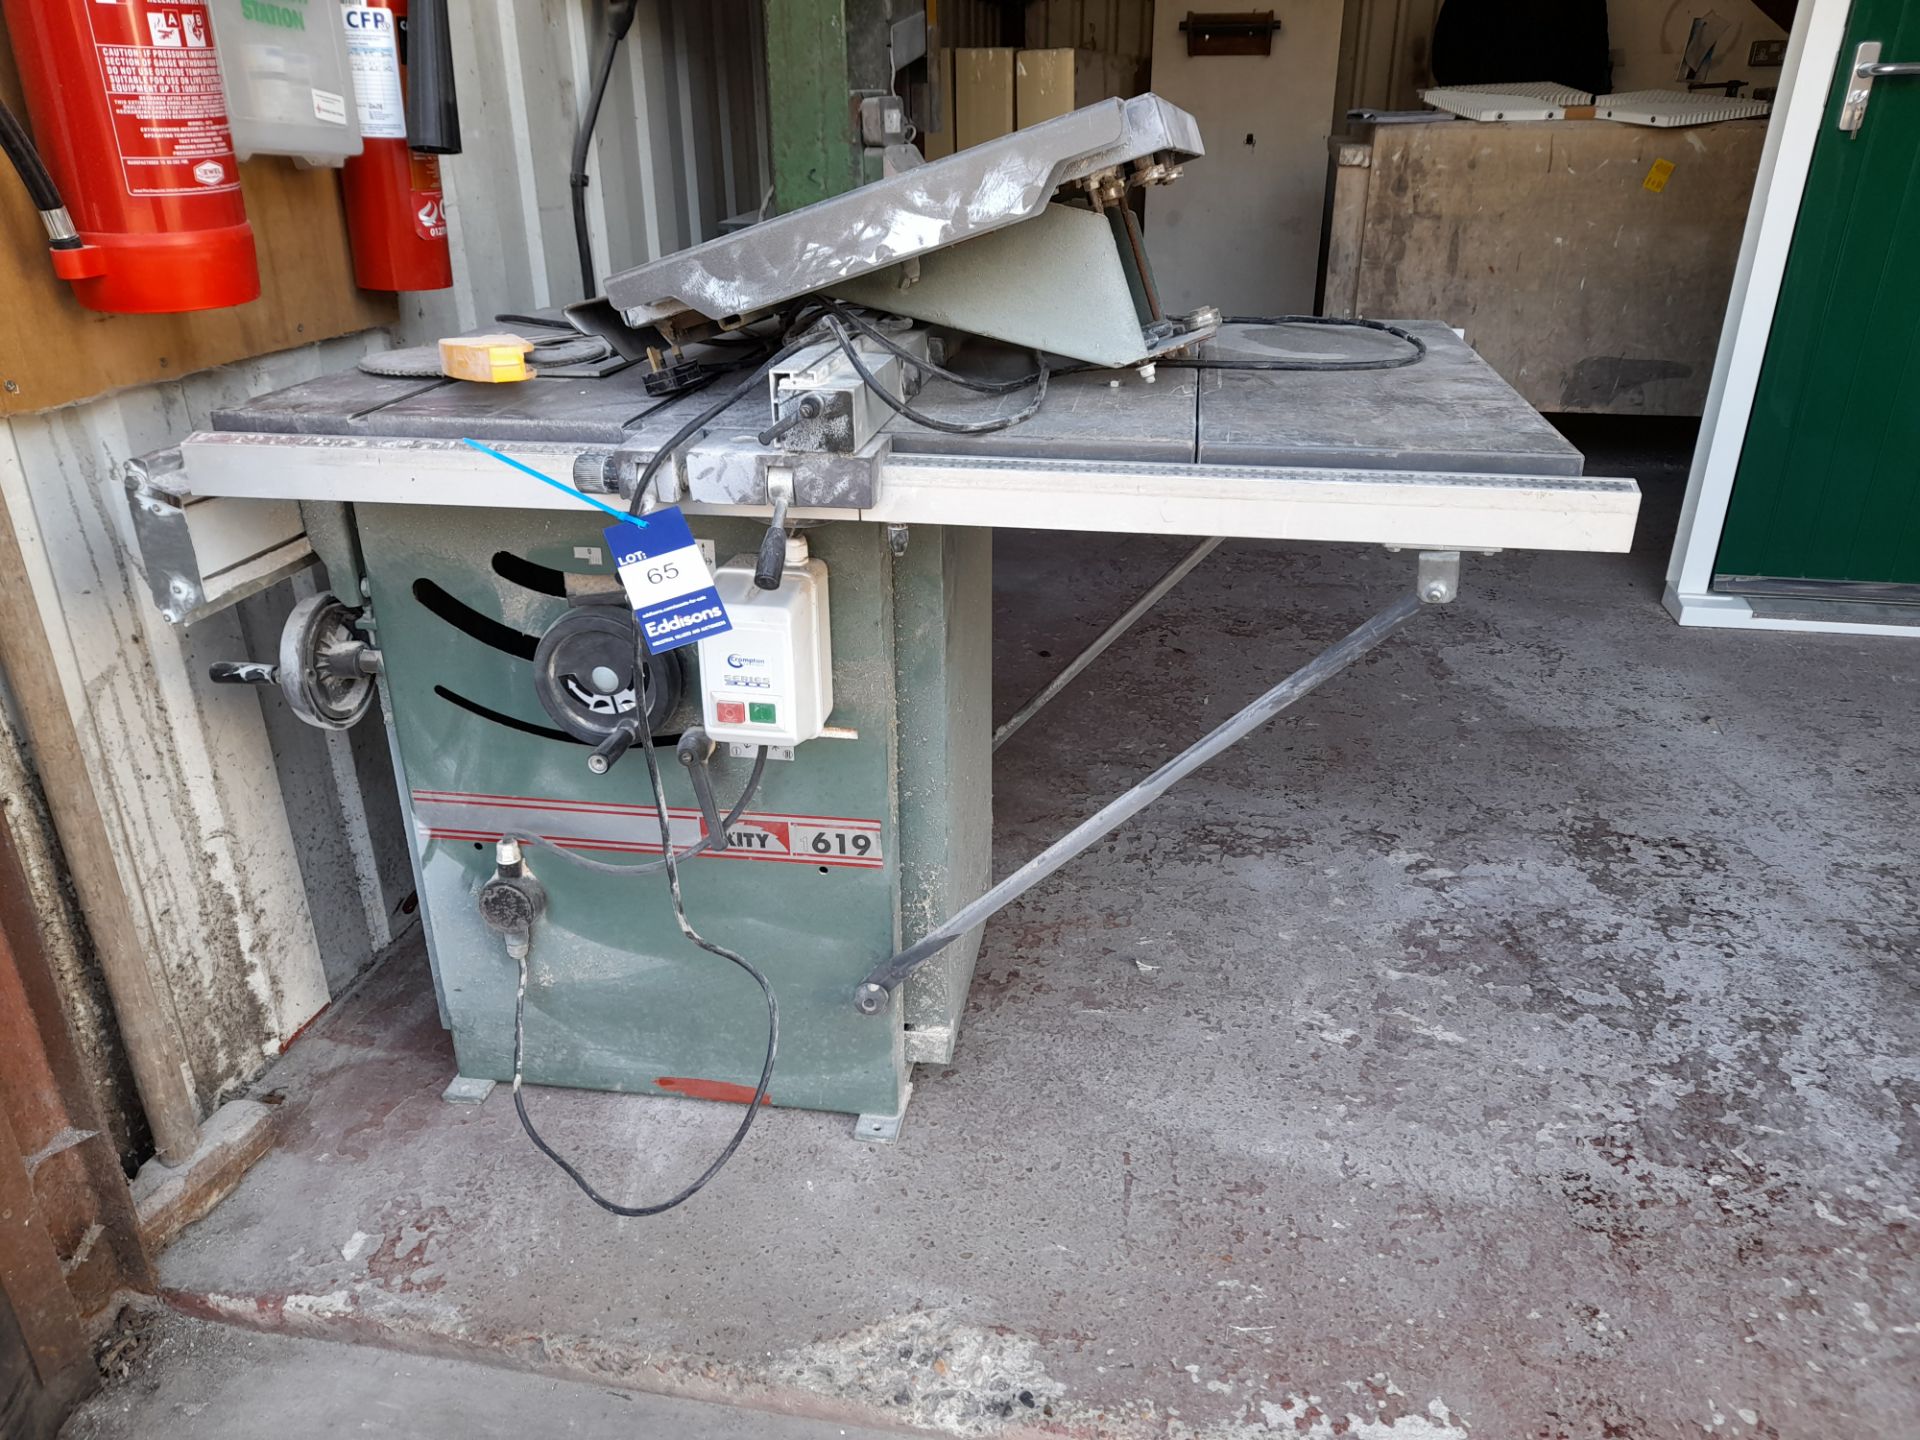 KITY 1619 table saw, Serial number 06089 (2000) - Image 2 of 3